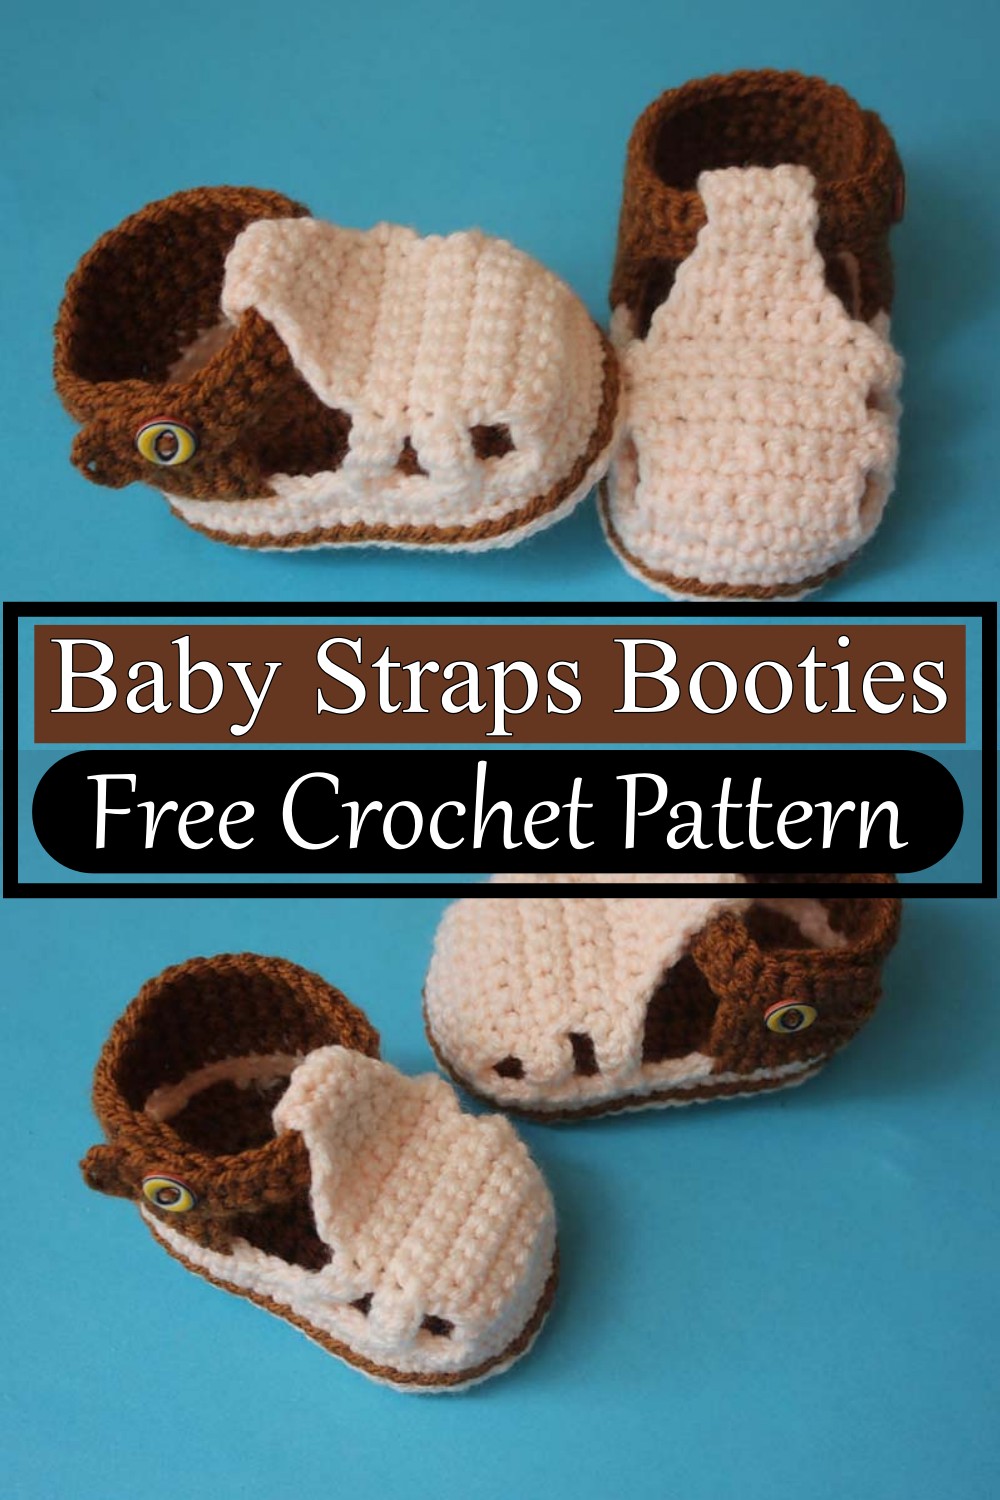 Baby Straps Booties